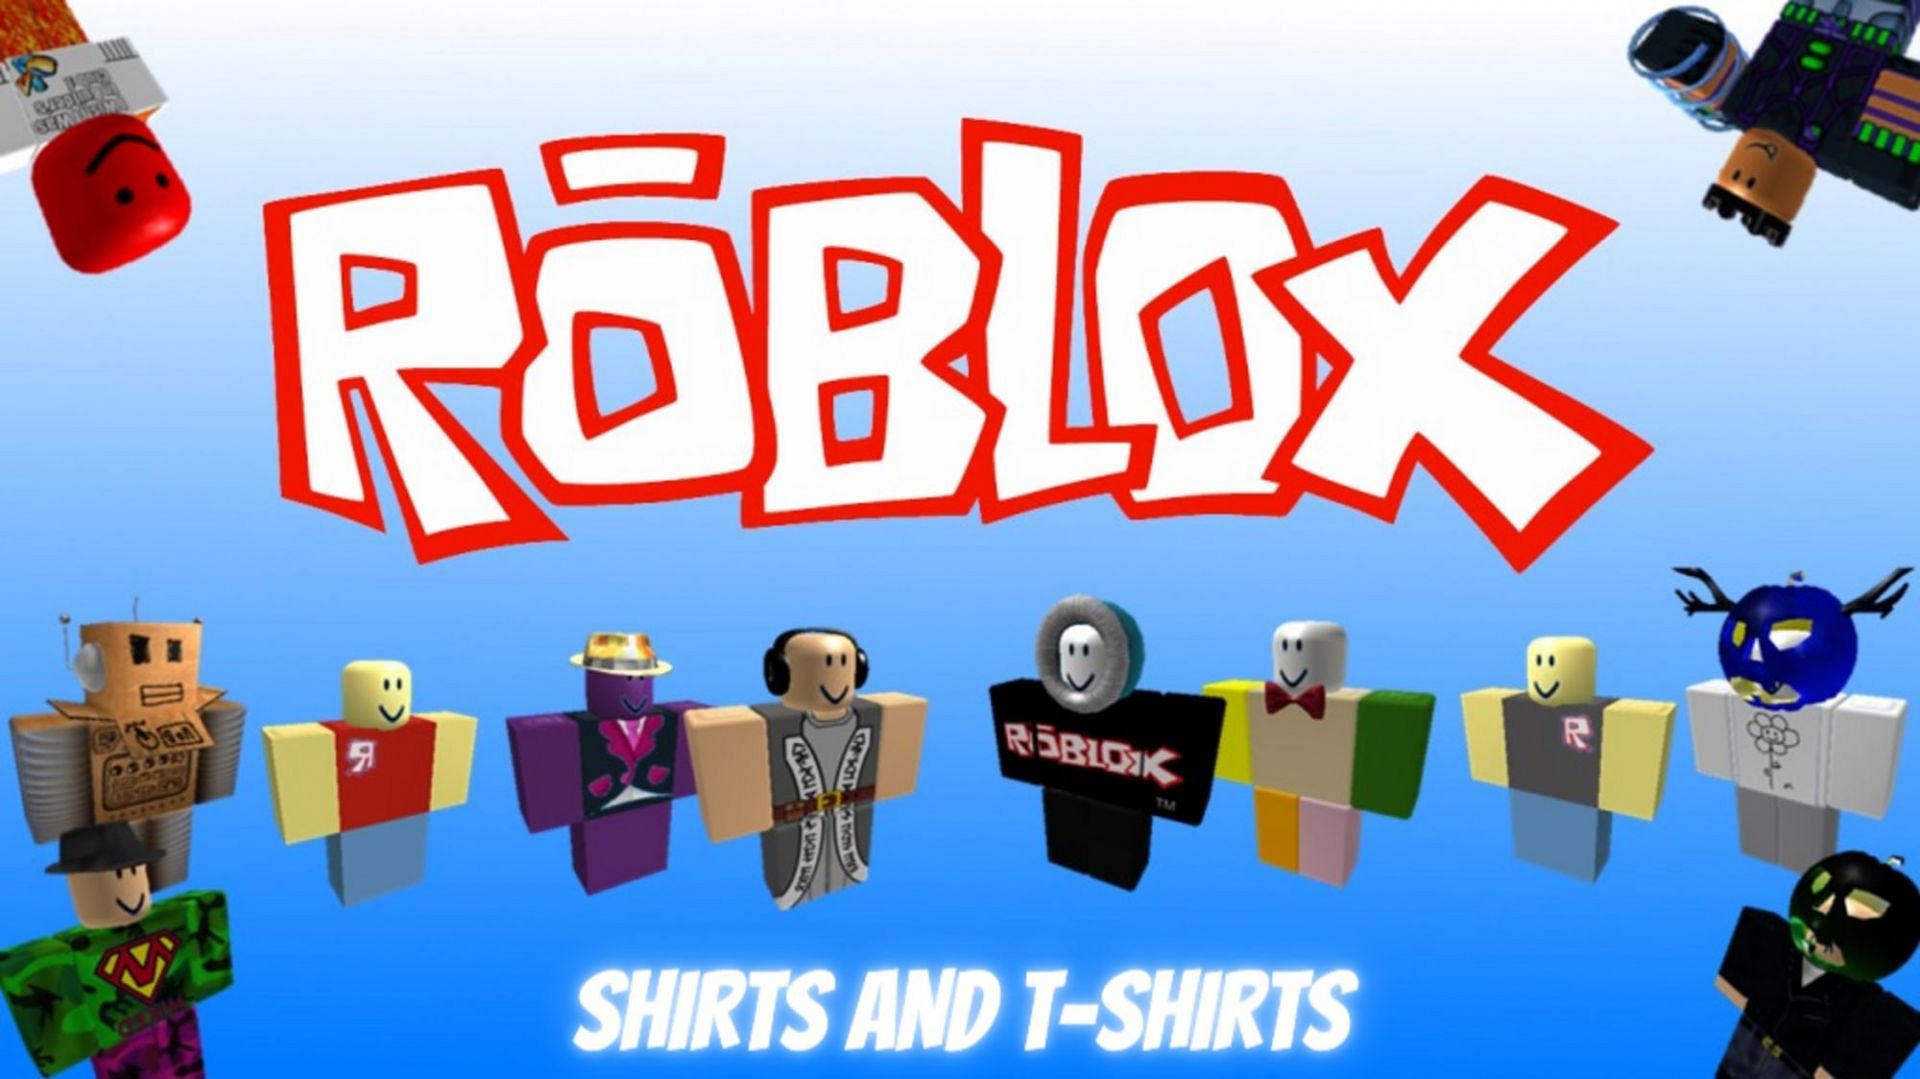 How to make a shirt in Roblox: Step-by-step guide